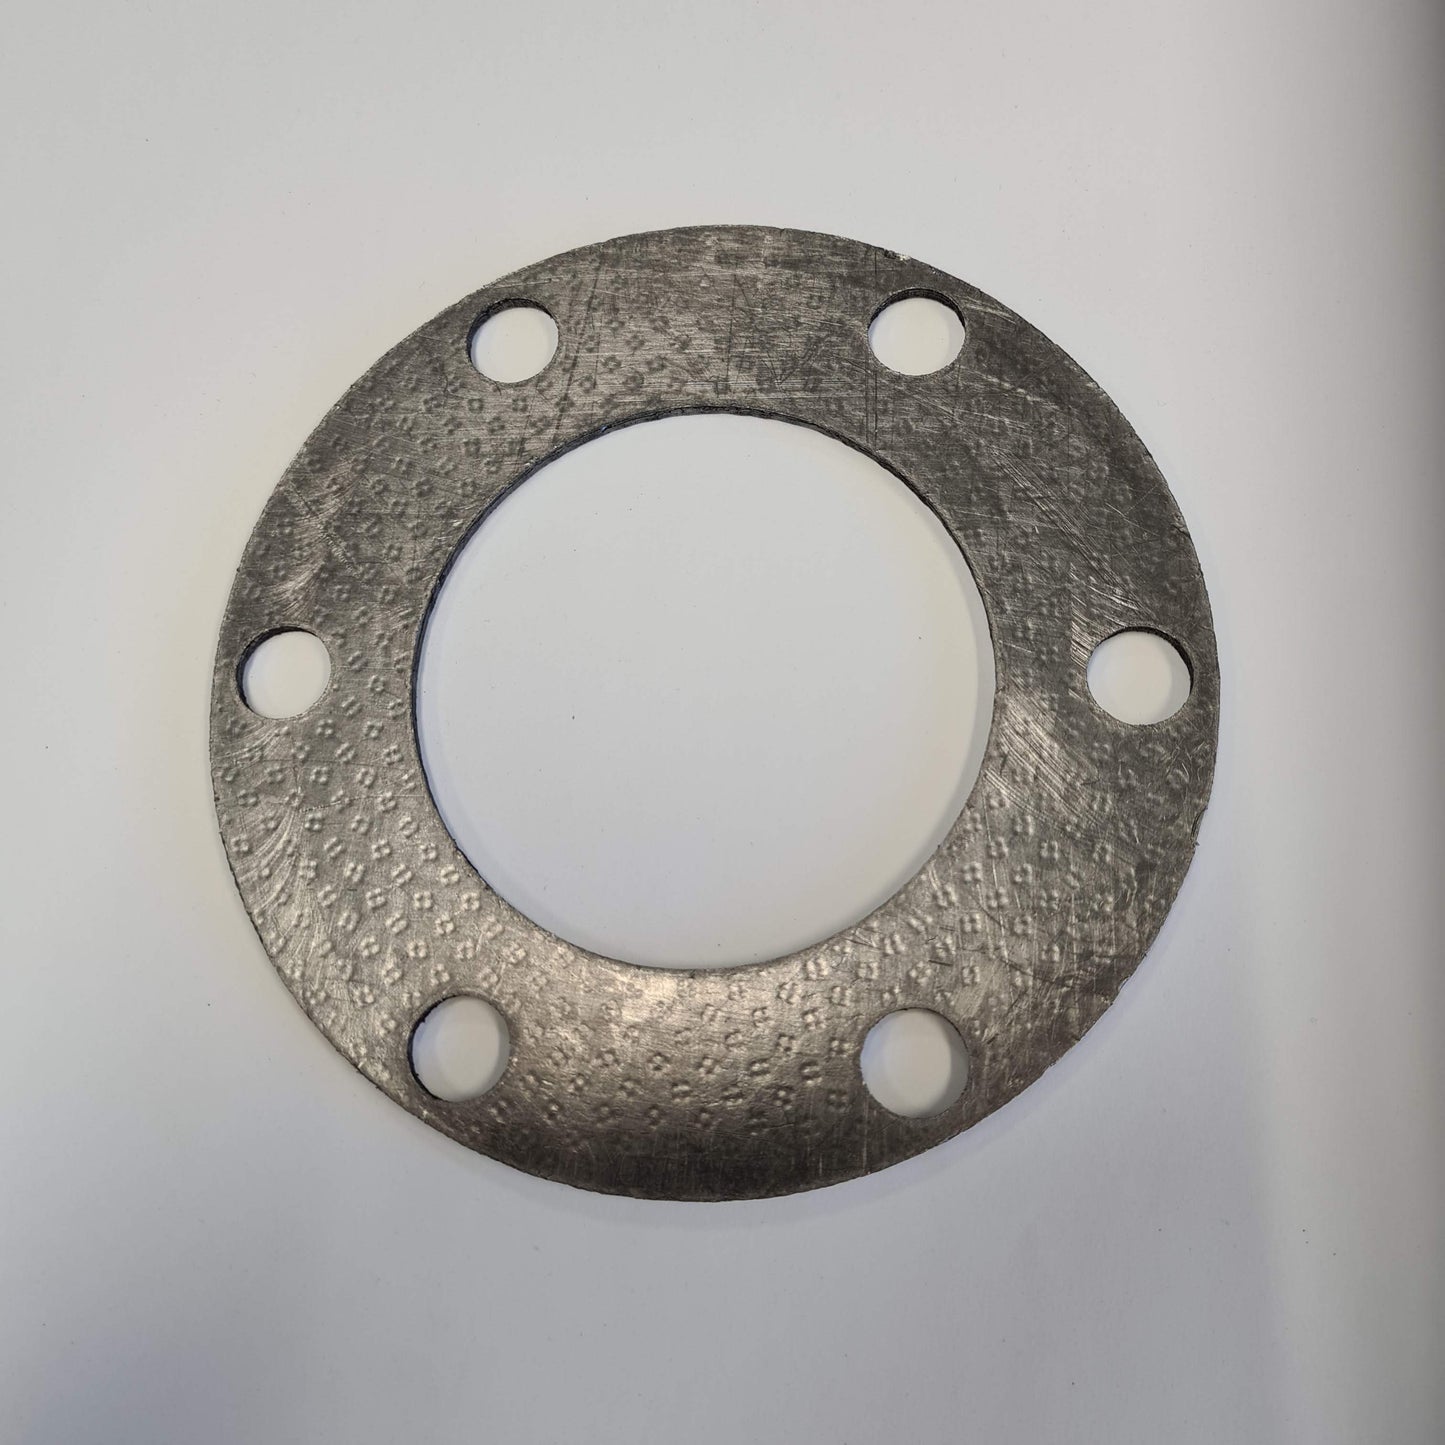 DIN PN10 Flange Gaskets 1/2" to 12" 15NB to 300NB ISO 7005